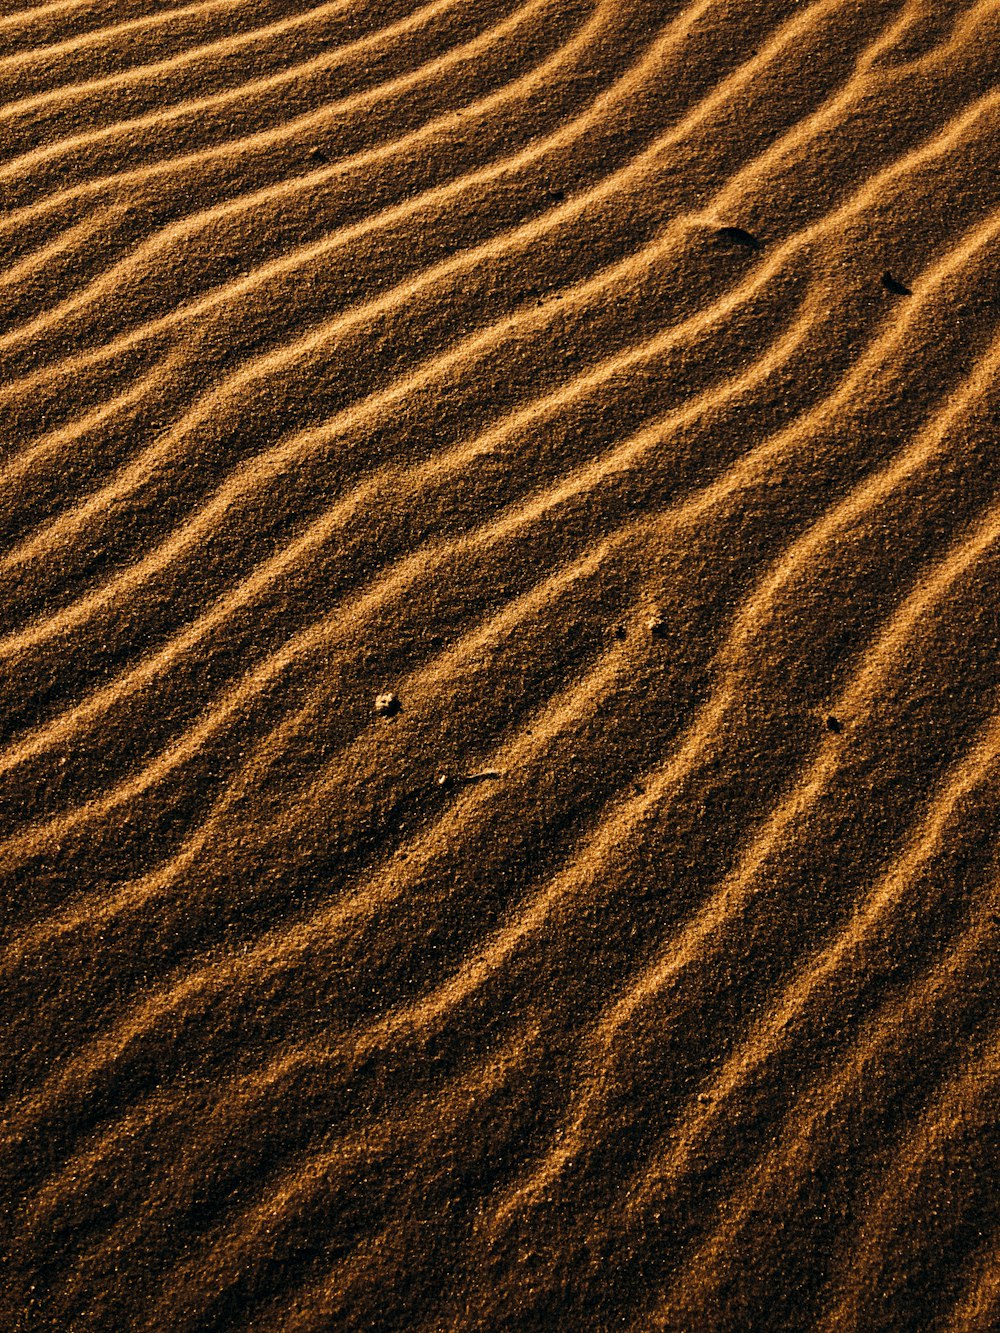 brown sand with shadow of person